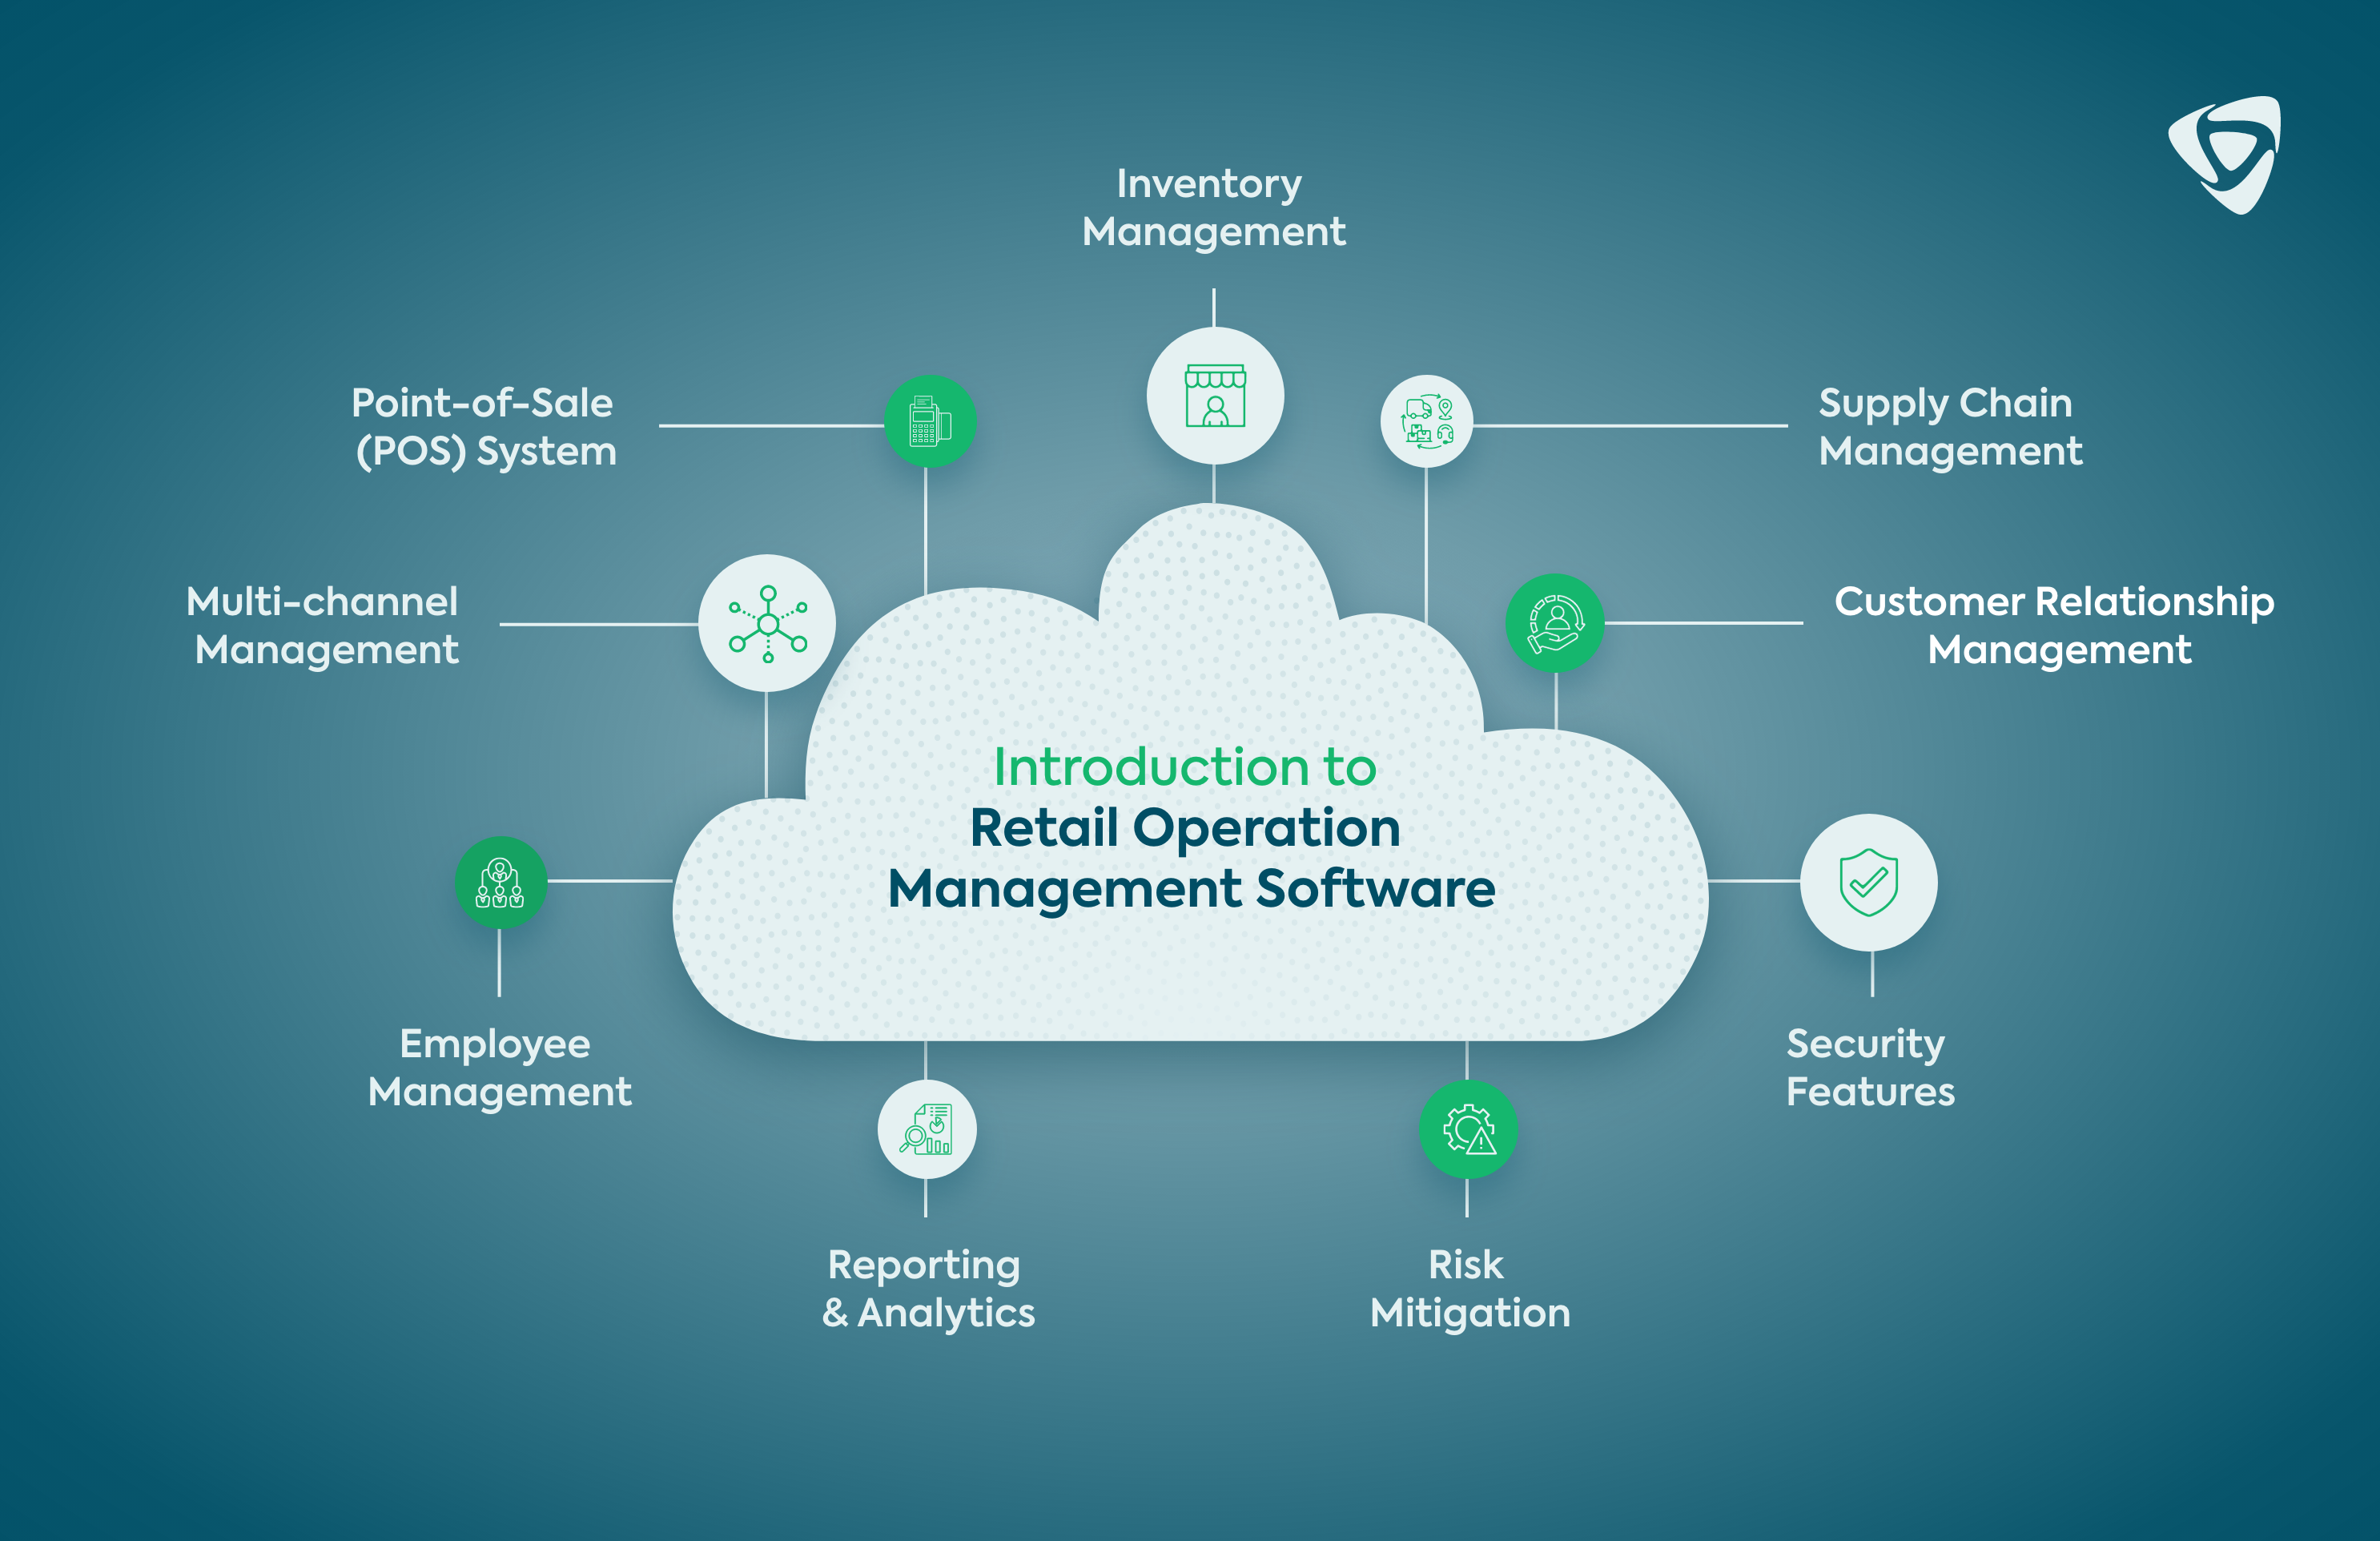 Introduction to Retail Operation Management Software